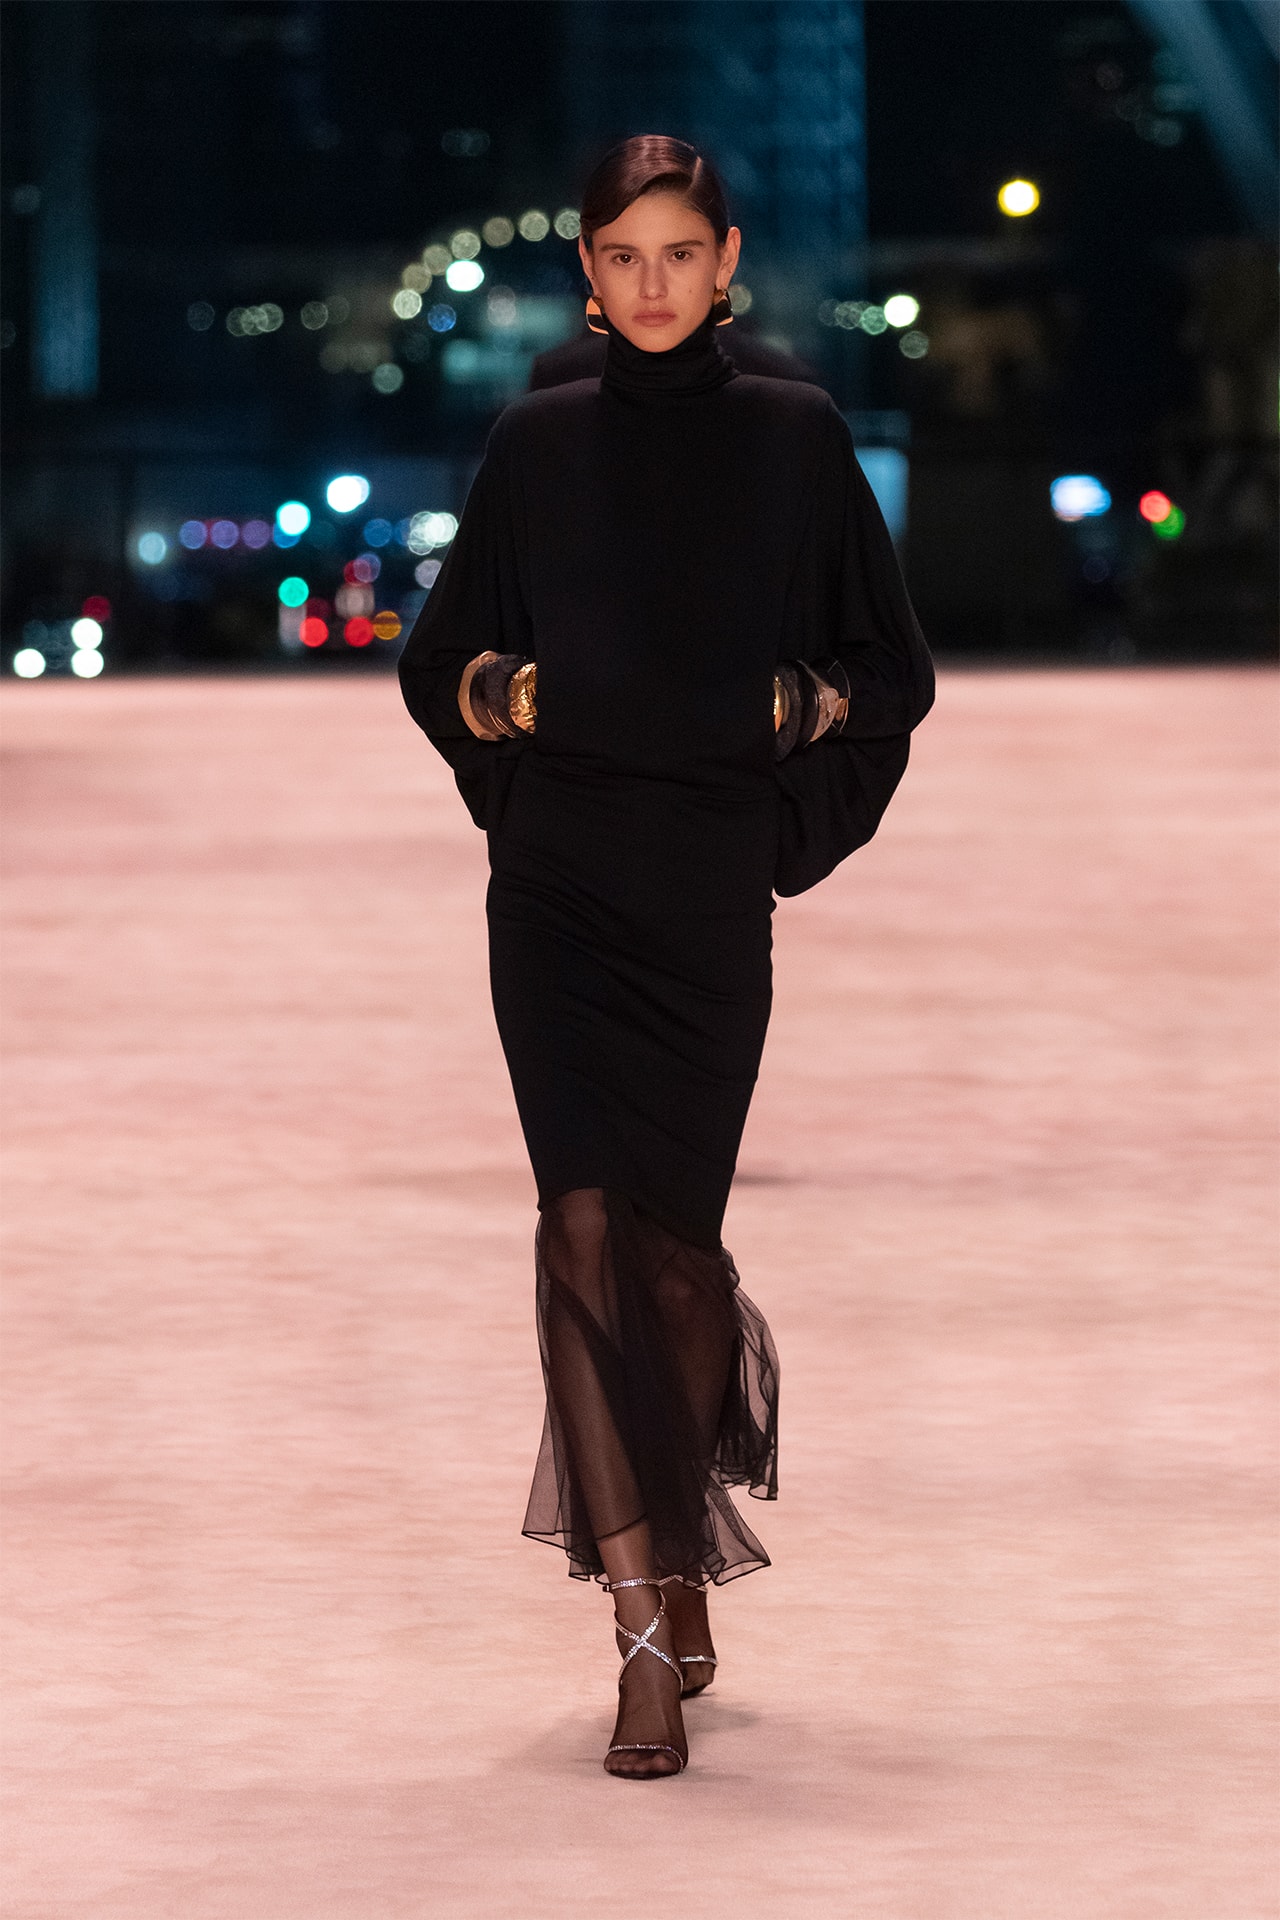 Yves Saint Laurent Black Coat and Evening Gown